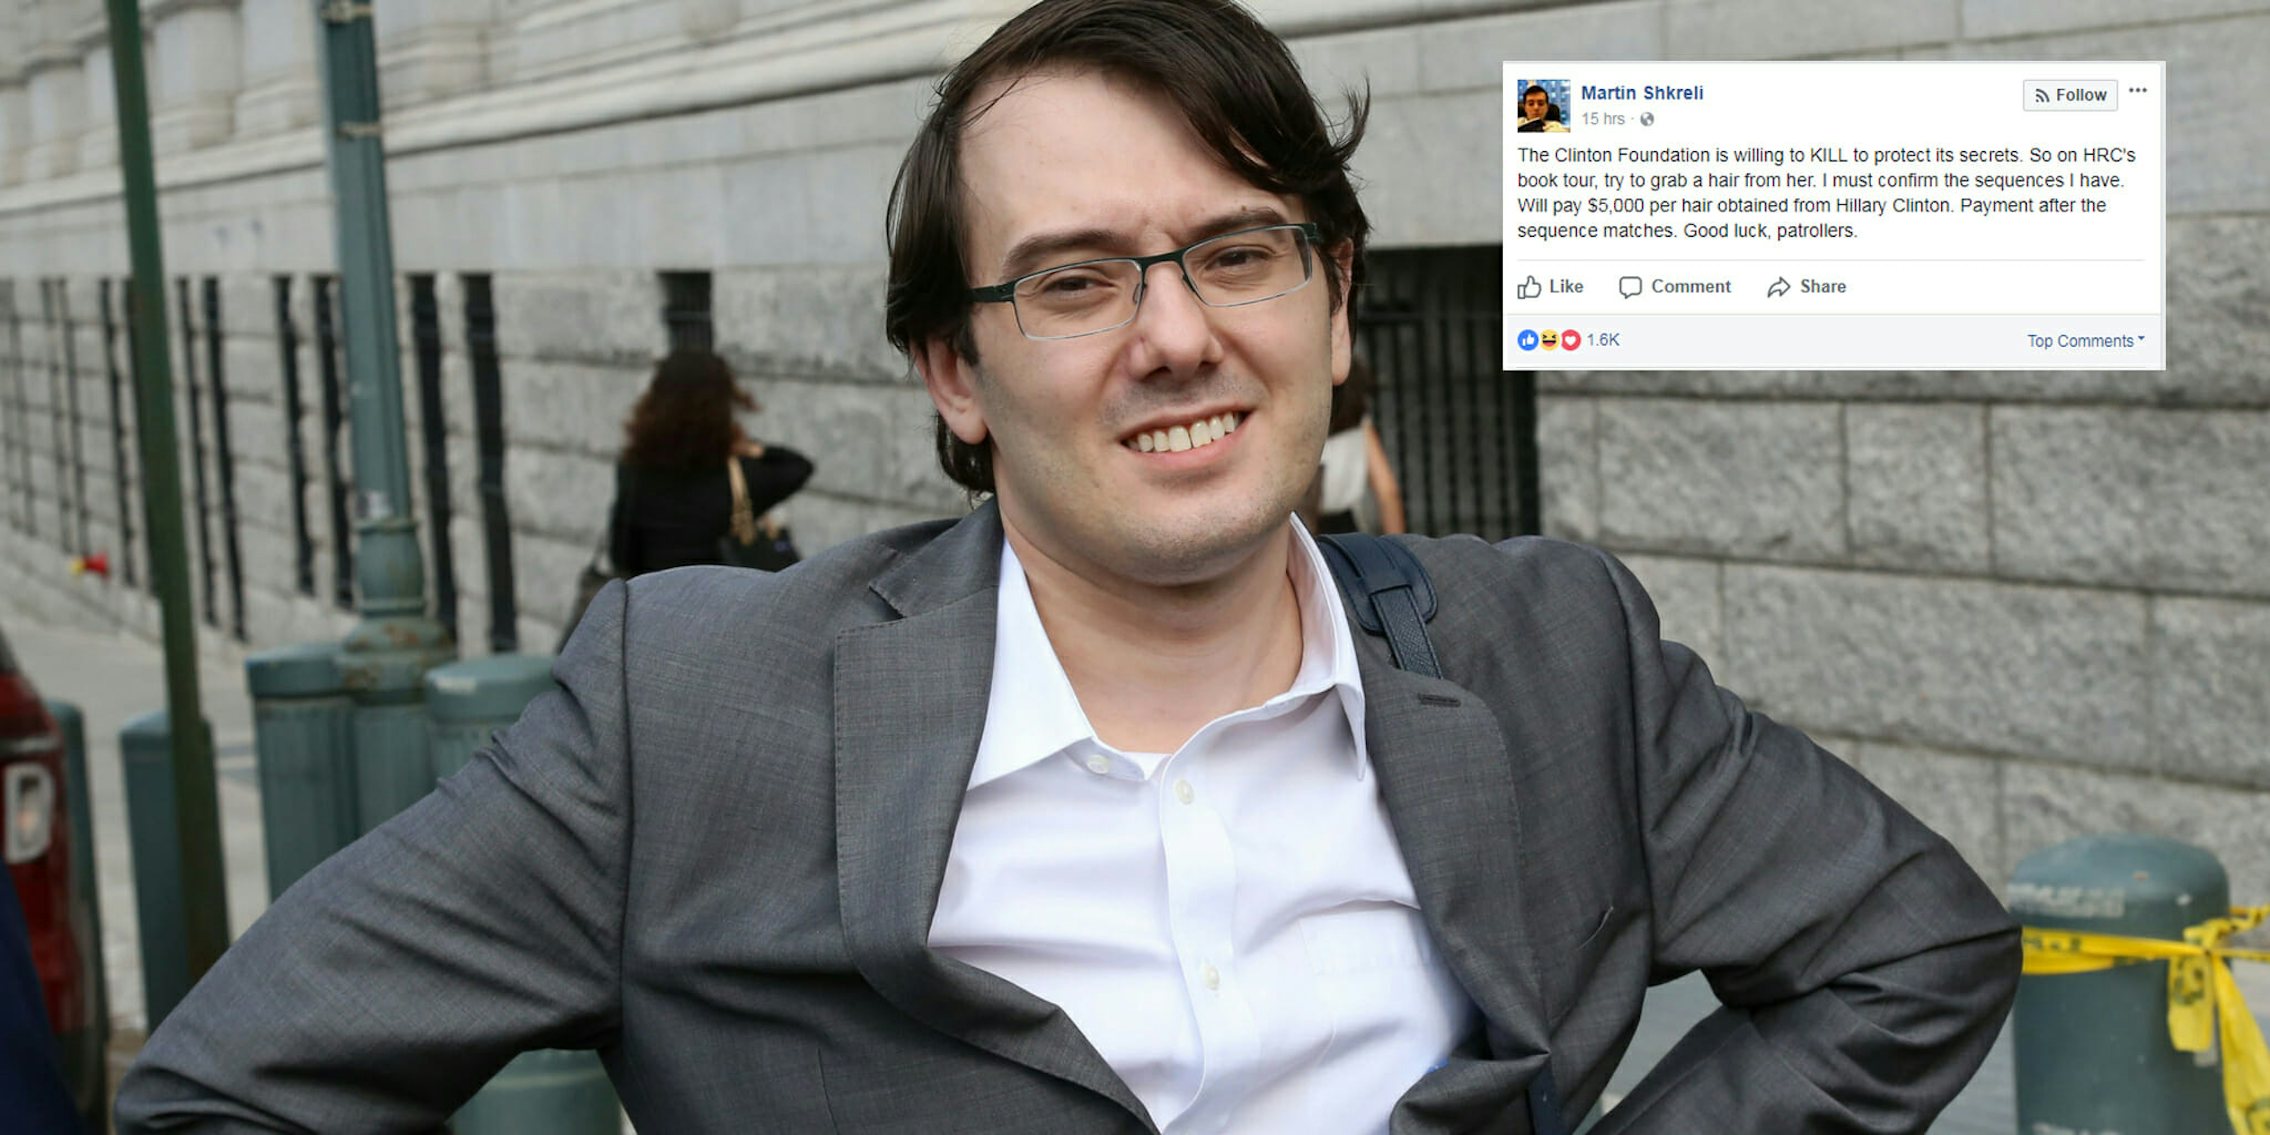 Martin Shkreli is asking his Facebook followers to steal Hillary Clinton's hair.